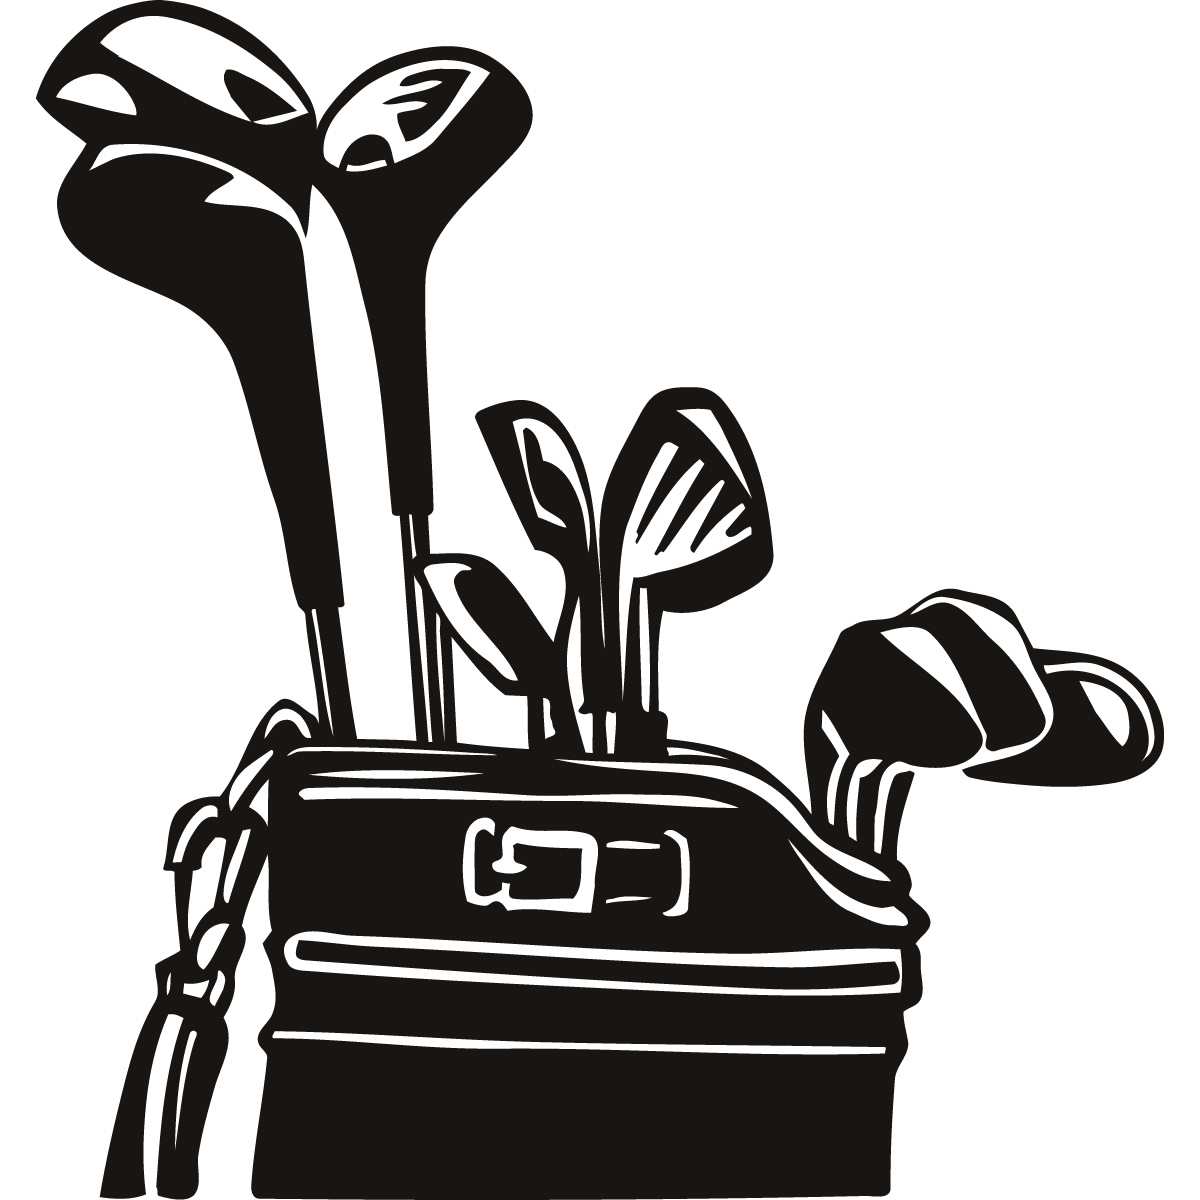 Golf Clubs Bag Sports and Hobbies Wall Art Decals Transfers